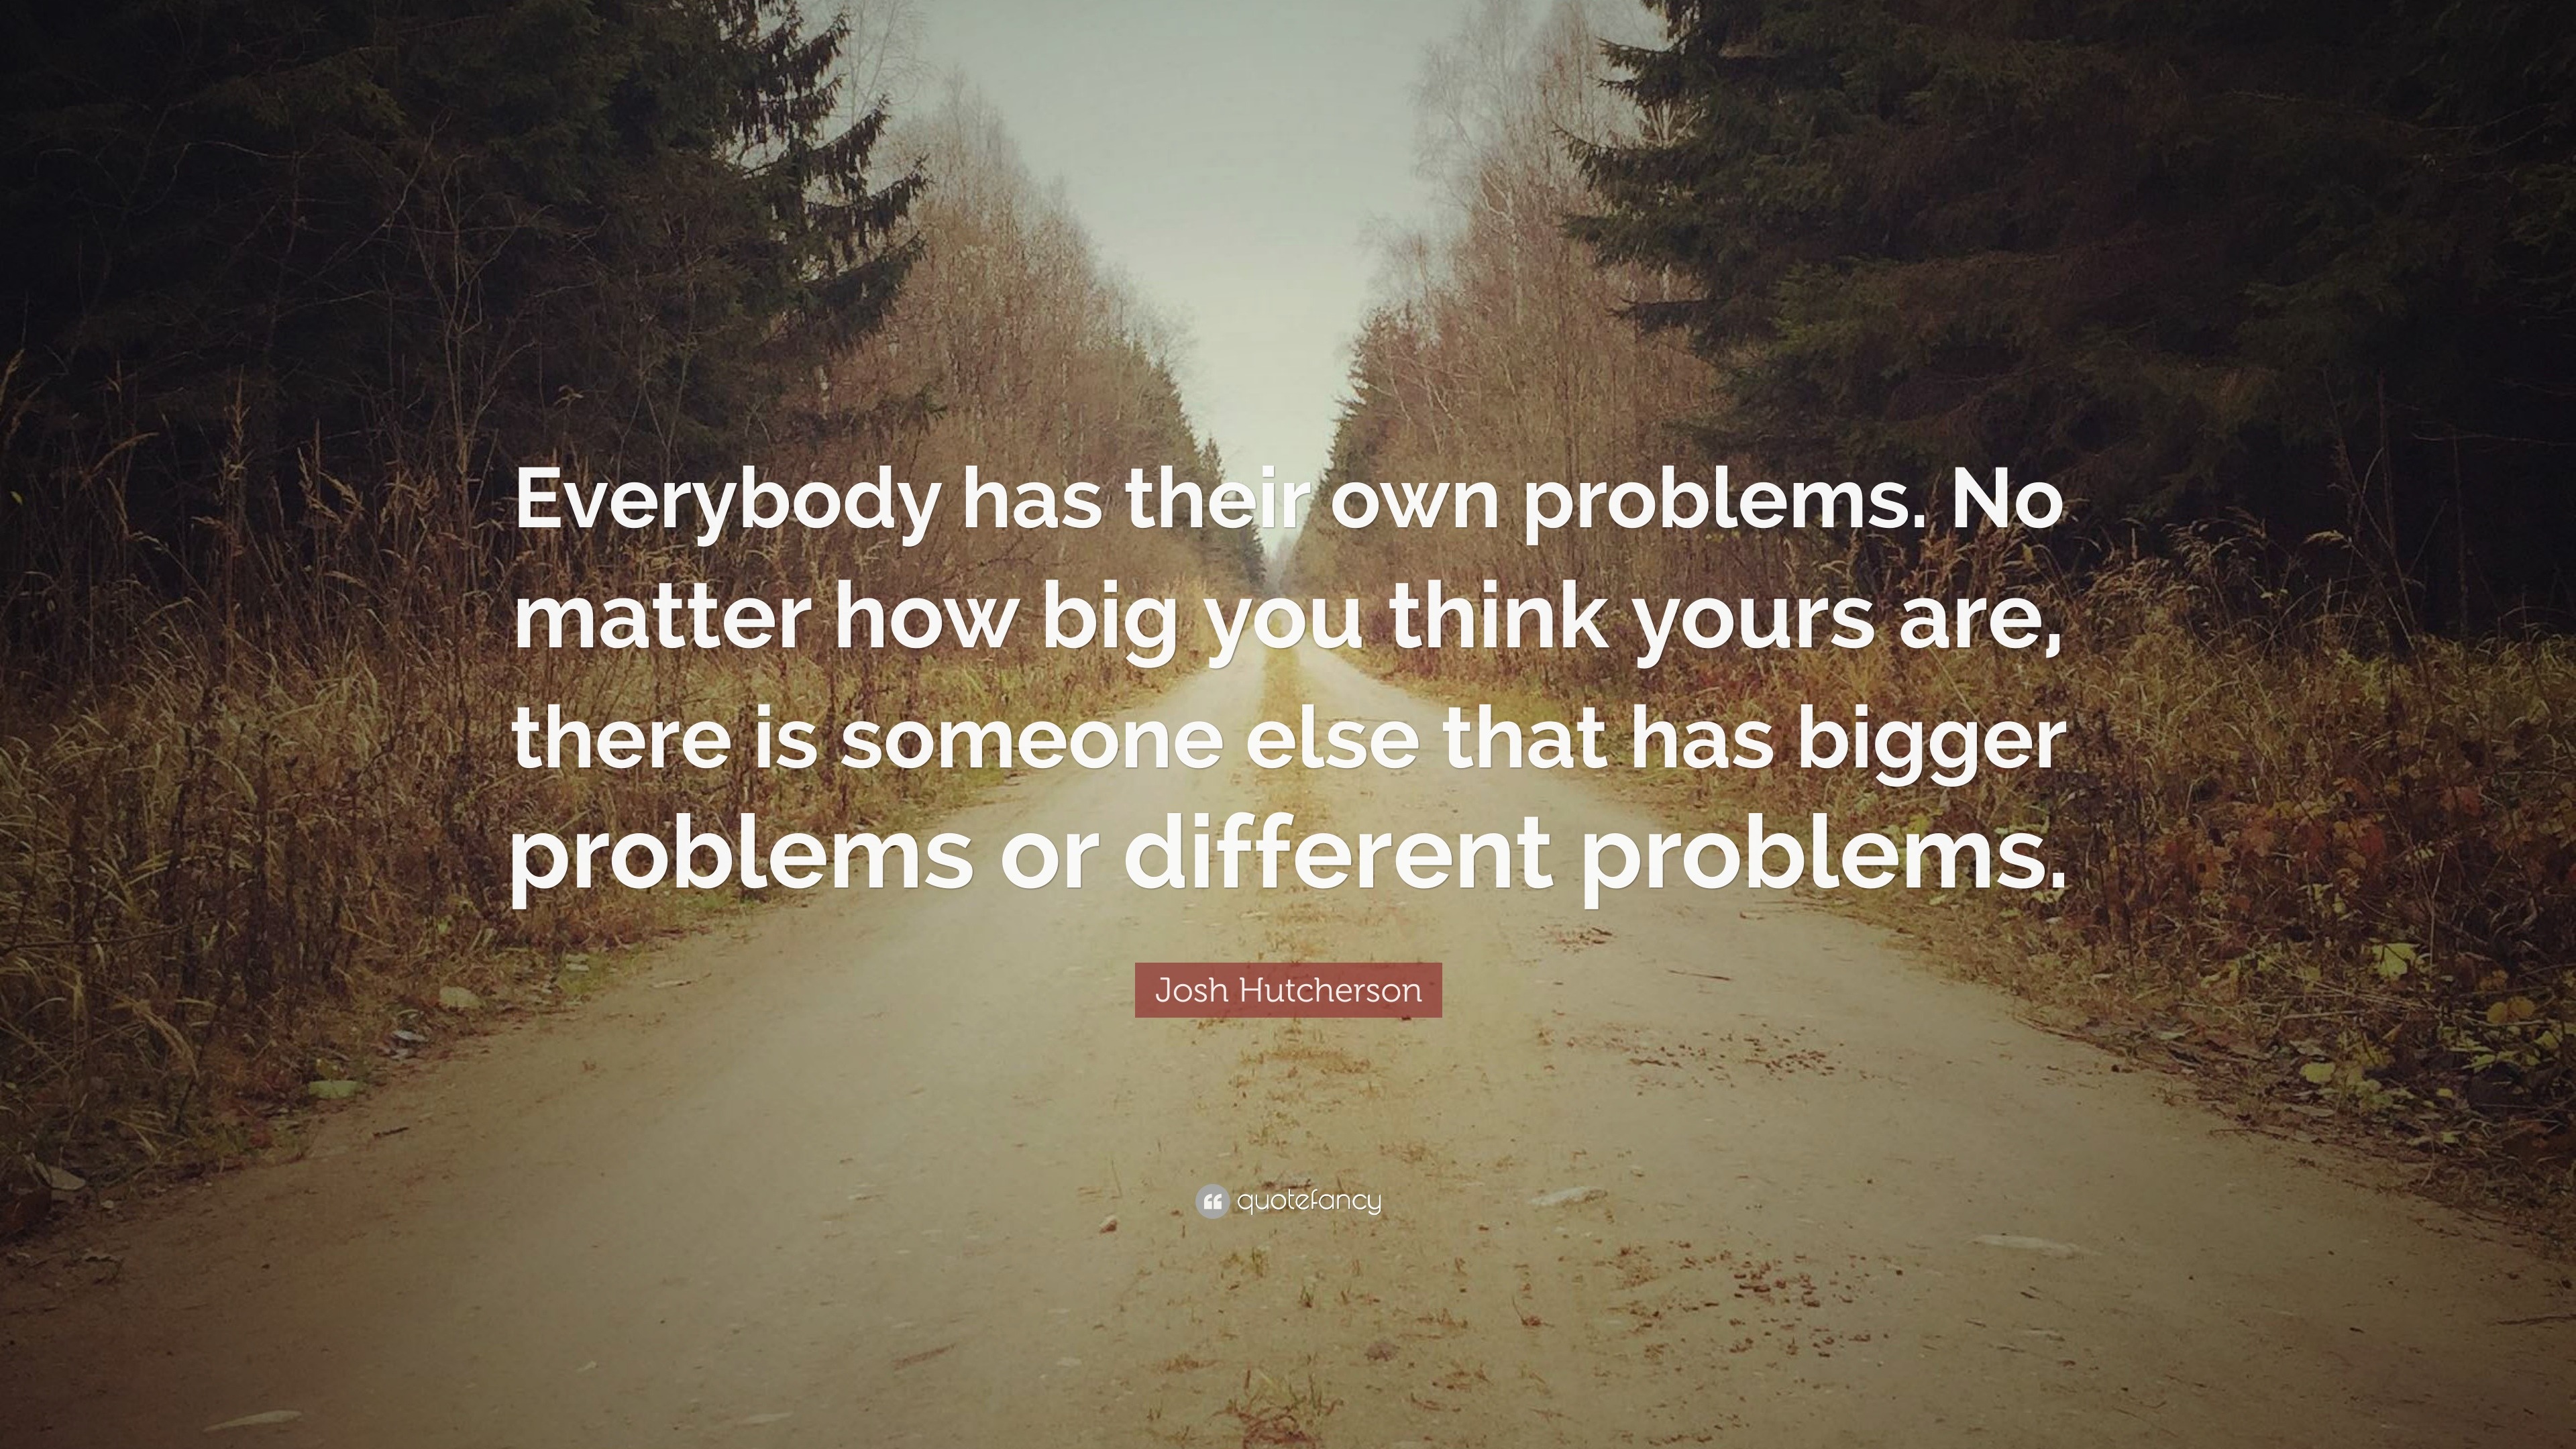 Josh Hutcherson Quote: “Everybody has their own problems. No matter how